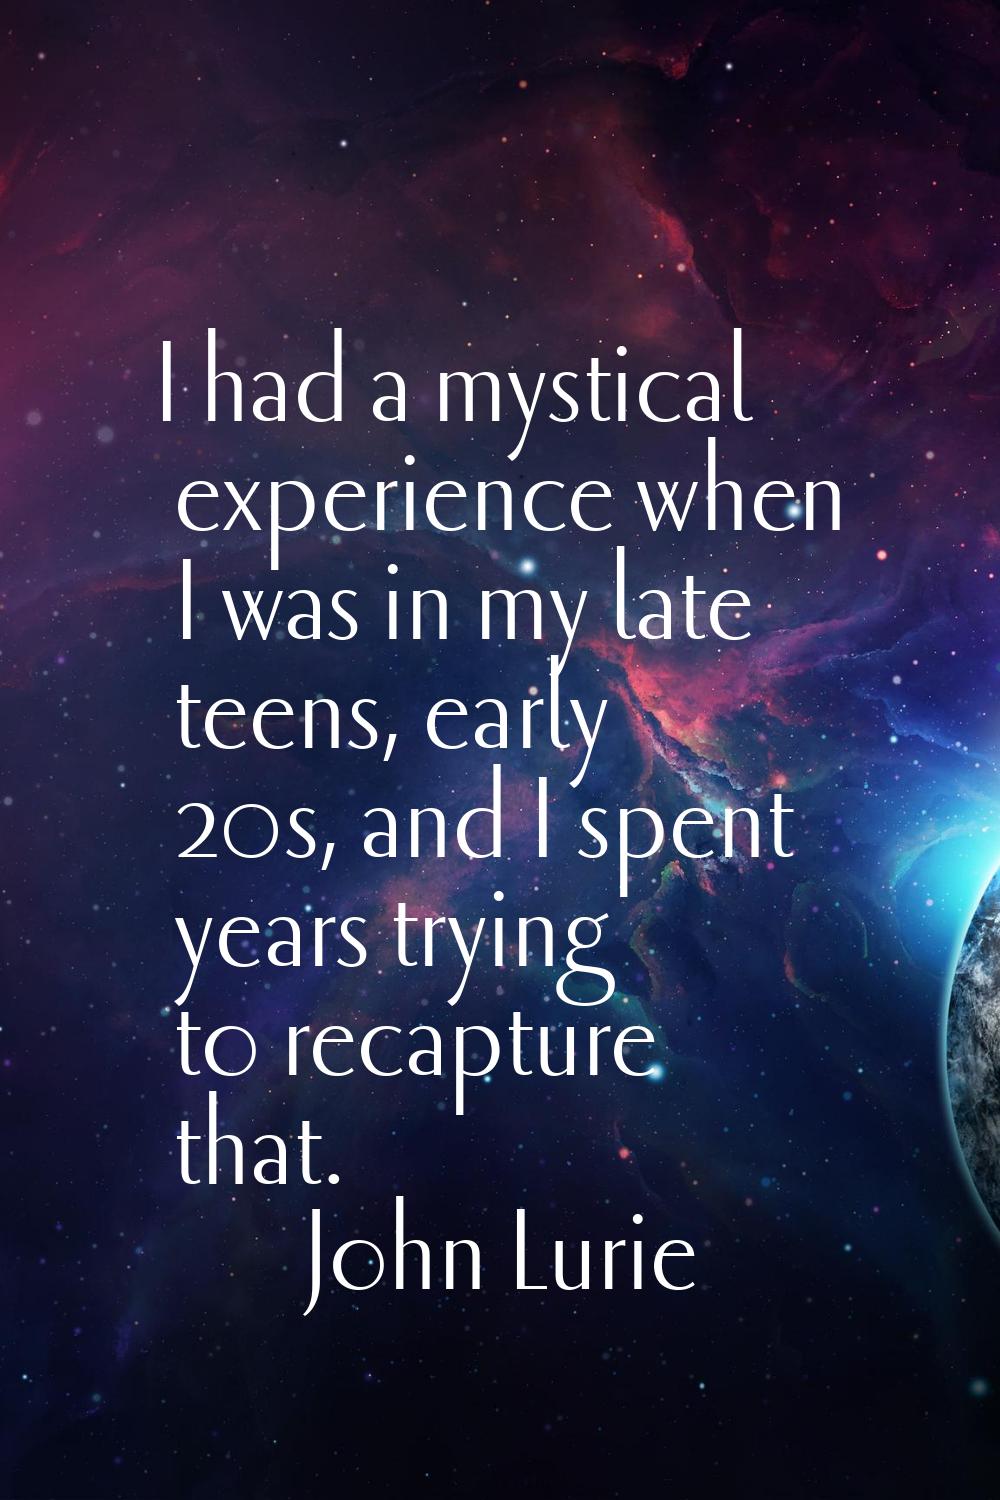 I had a mystical experience when I was in my late teens, early 20s, and I spent years trying to rec